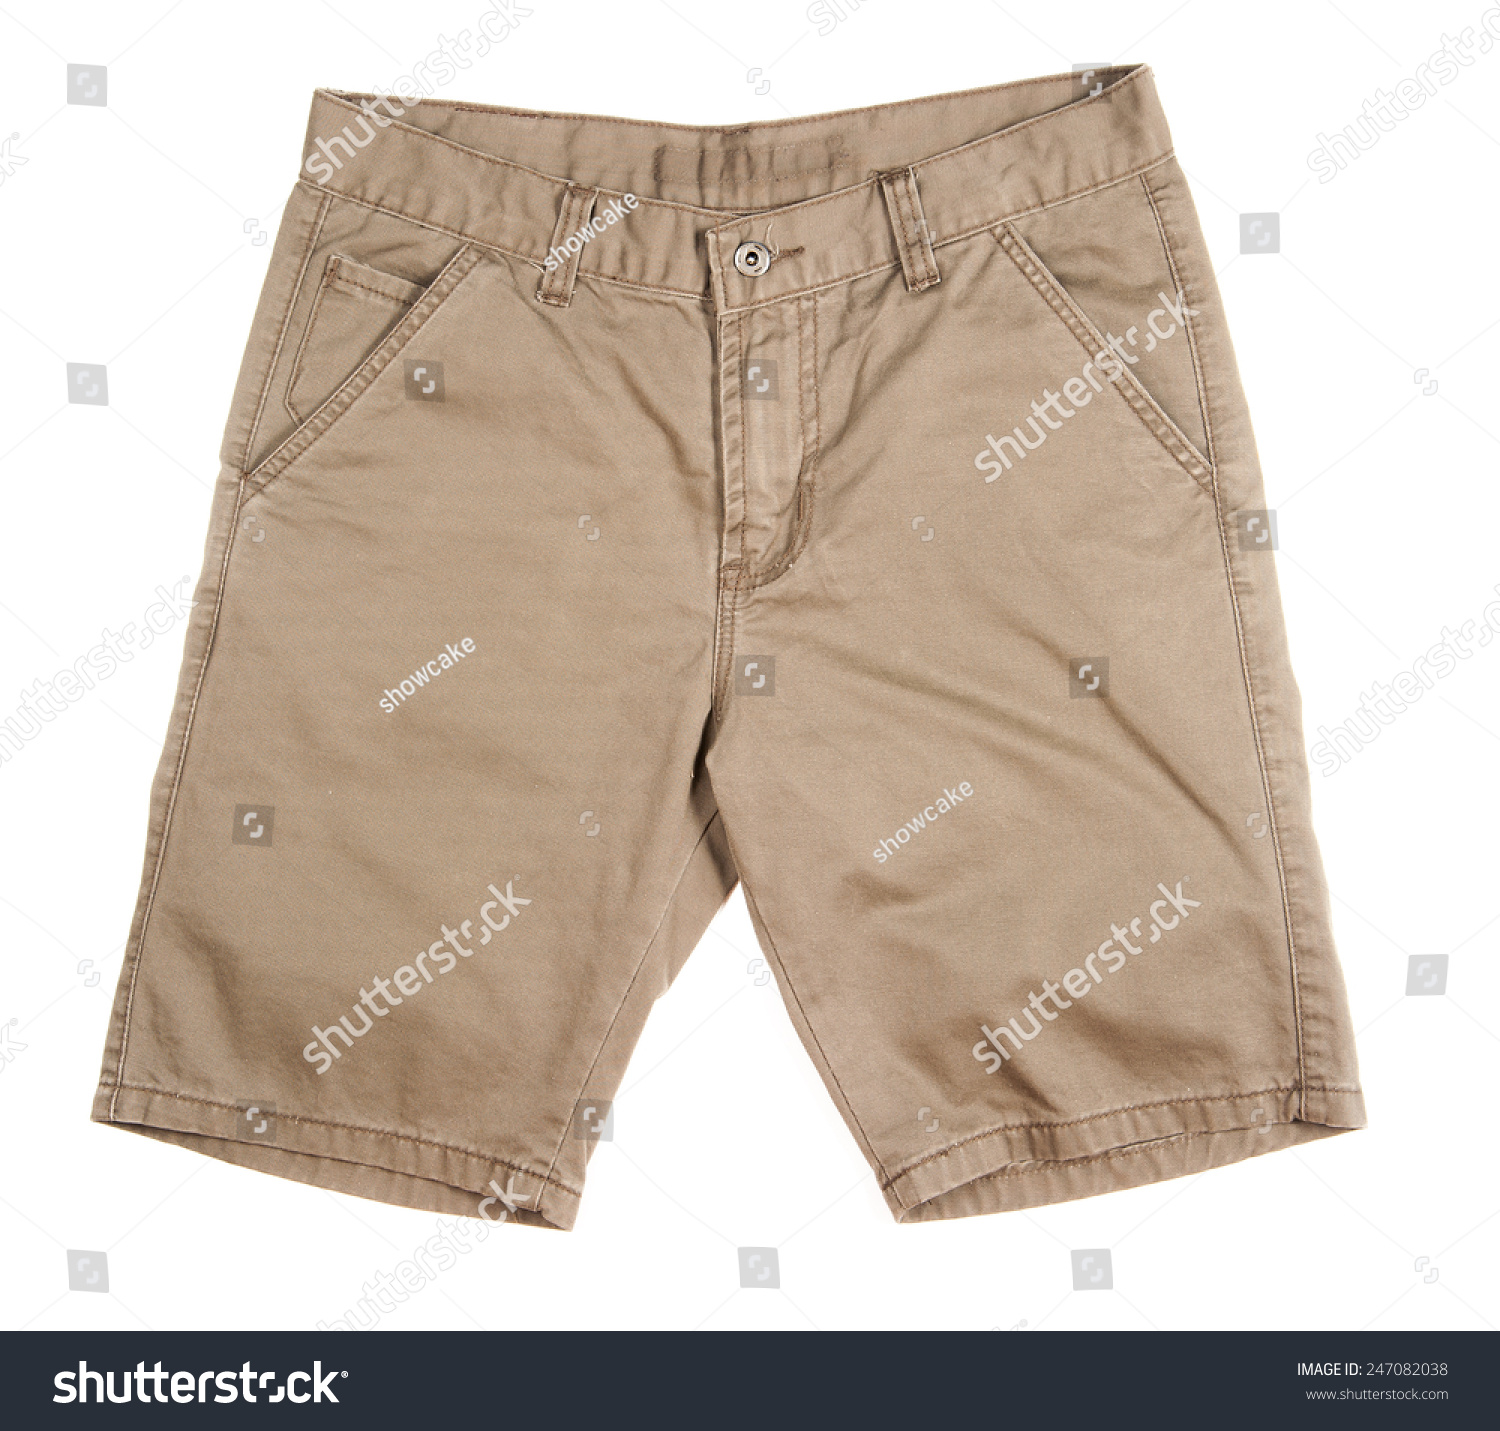 [Image: stock-photo-trousers-with-tagging-on-whi...082038.jpg]